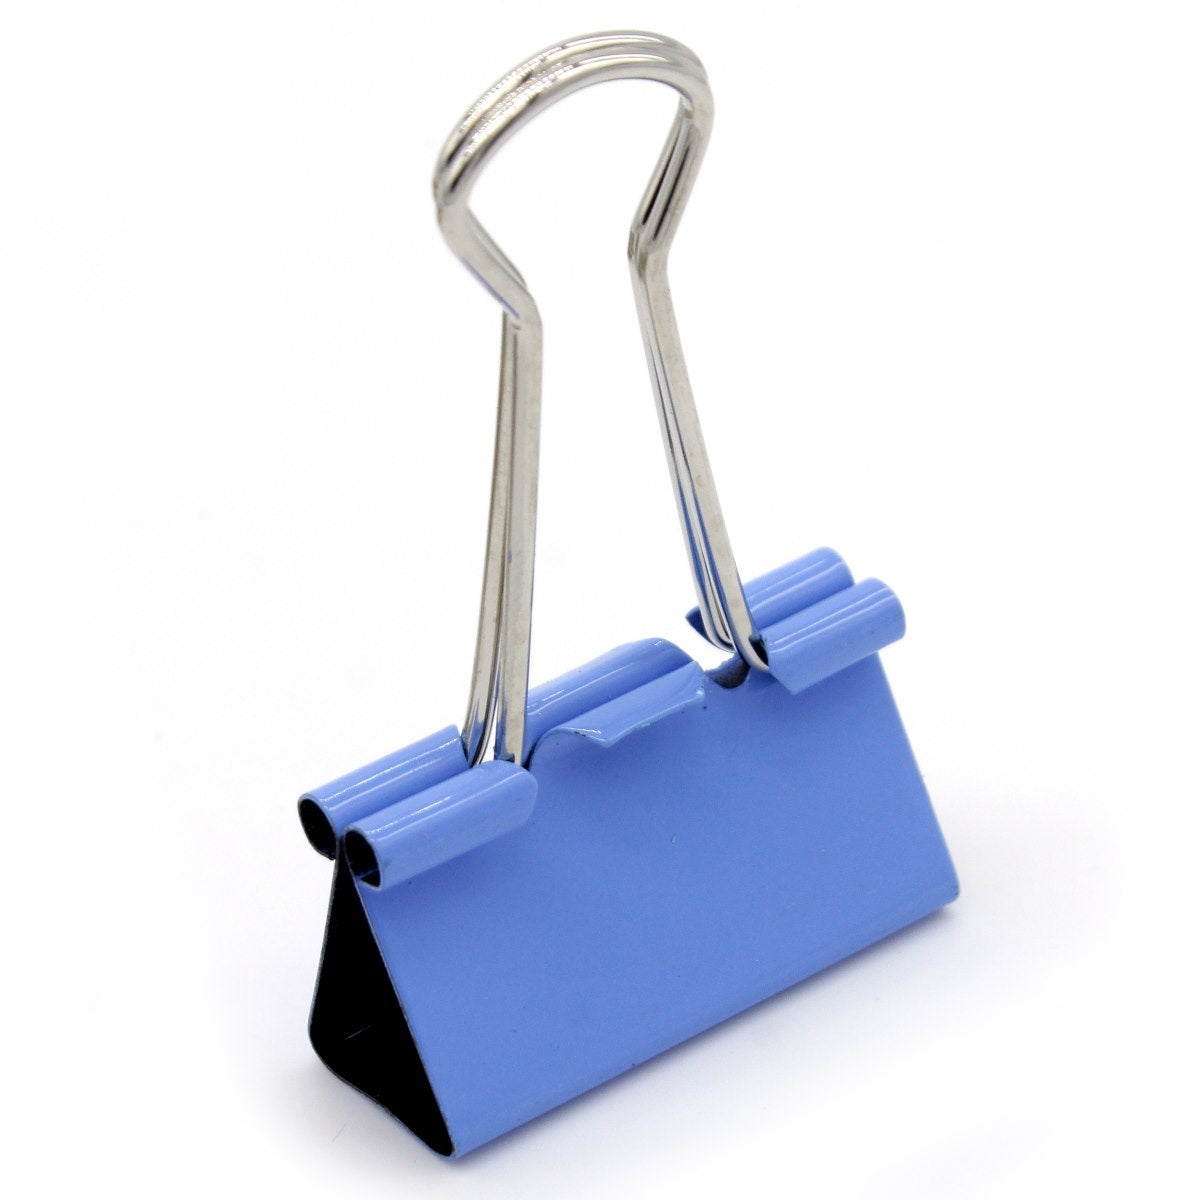 Set of 24 Pcs Binder Clips Assorted Colors 32mm - For Shops, Schools, Corporates, Office Use